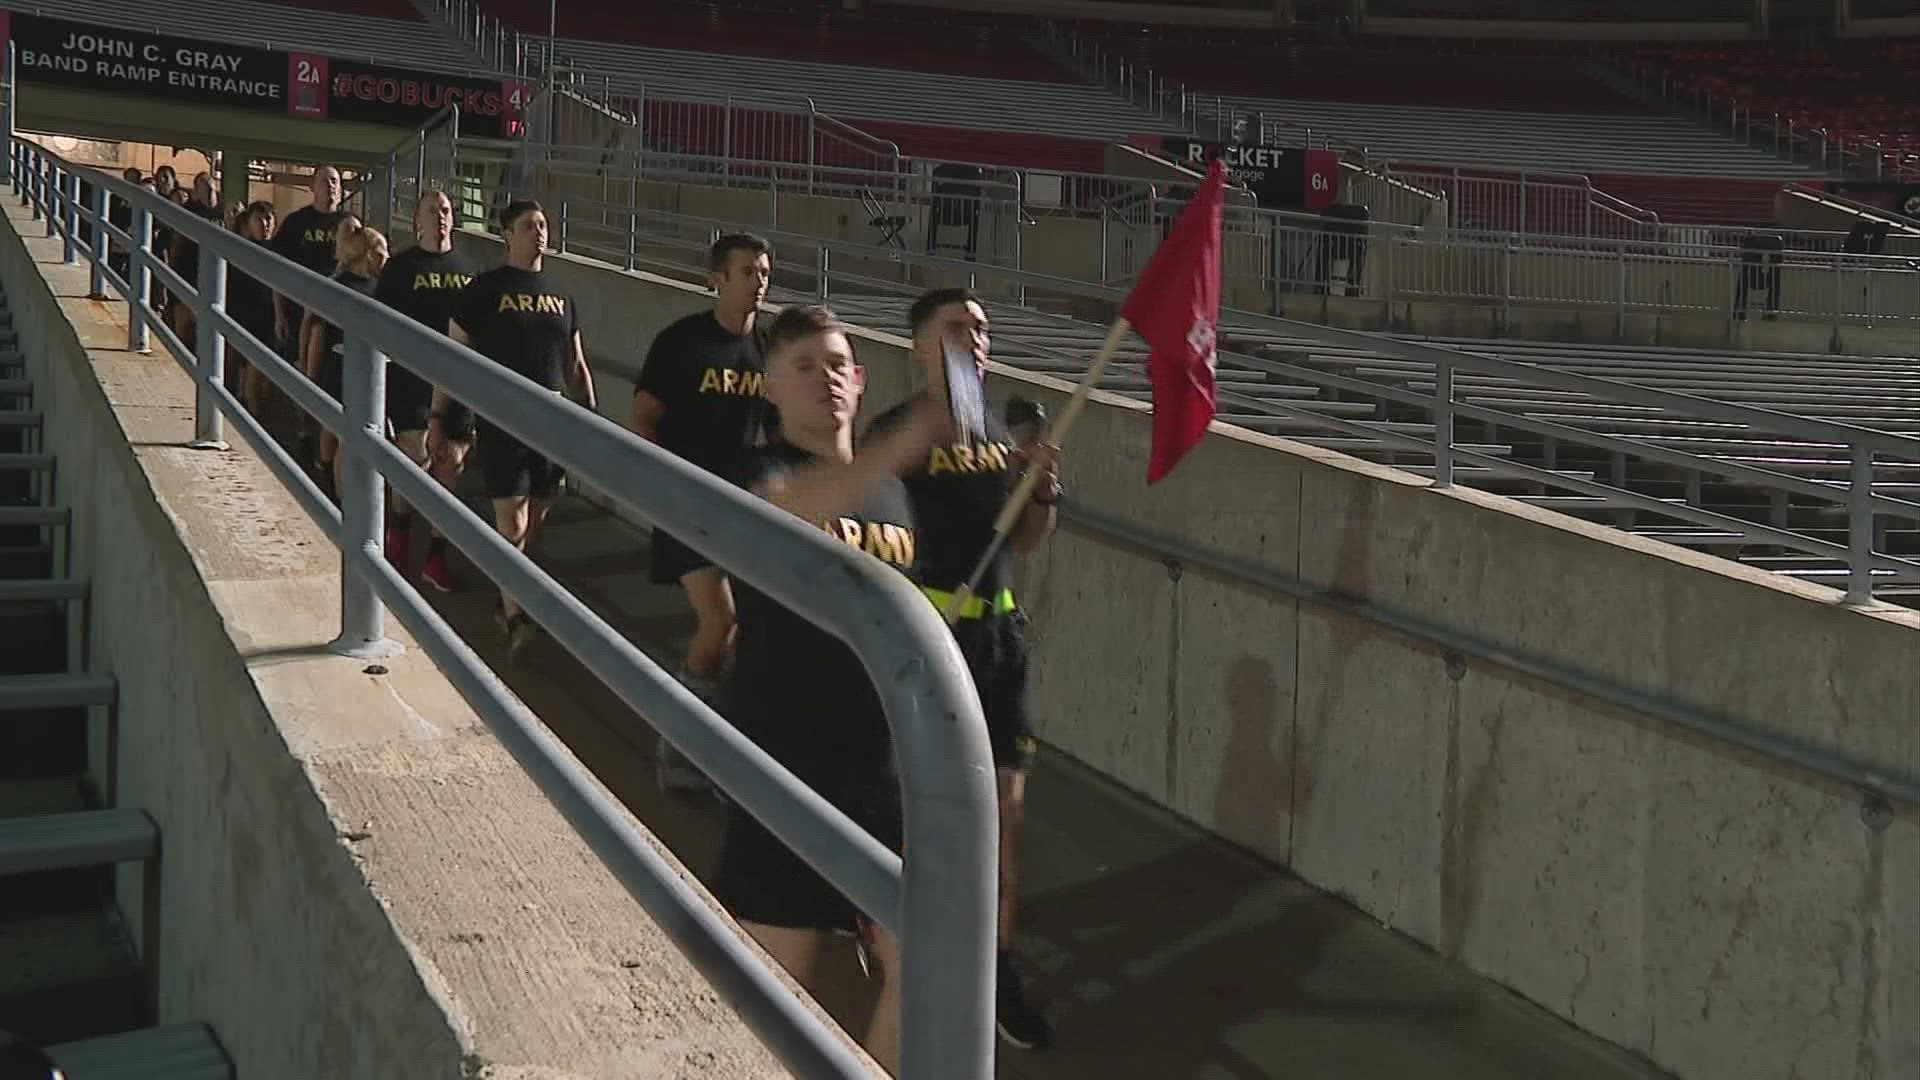 The ROTC cadets ran 110 flights of stairs -- the equivalent of one World Trade Center tower.